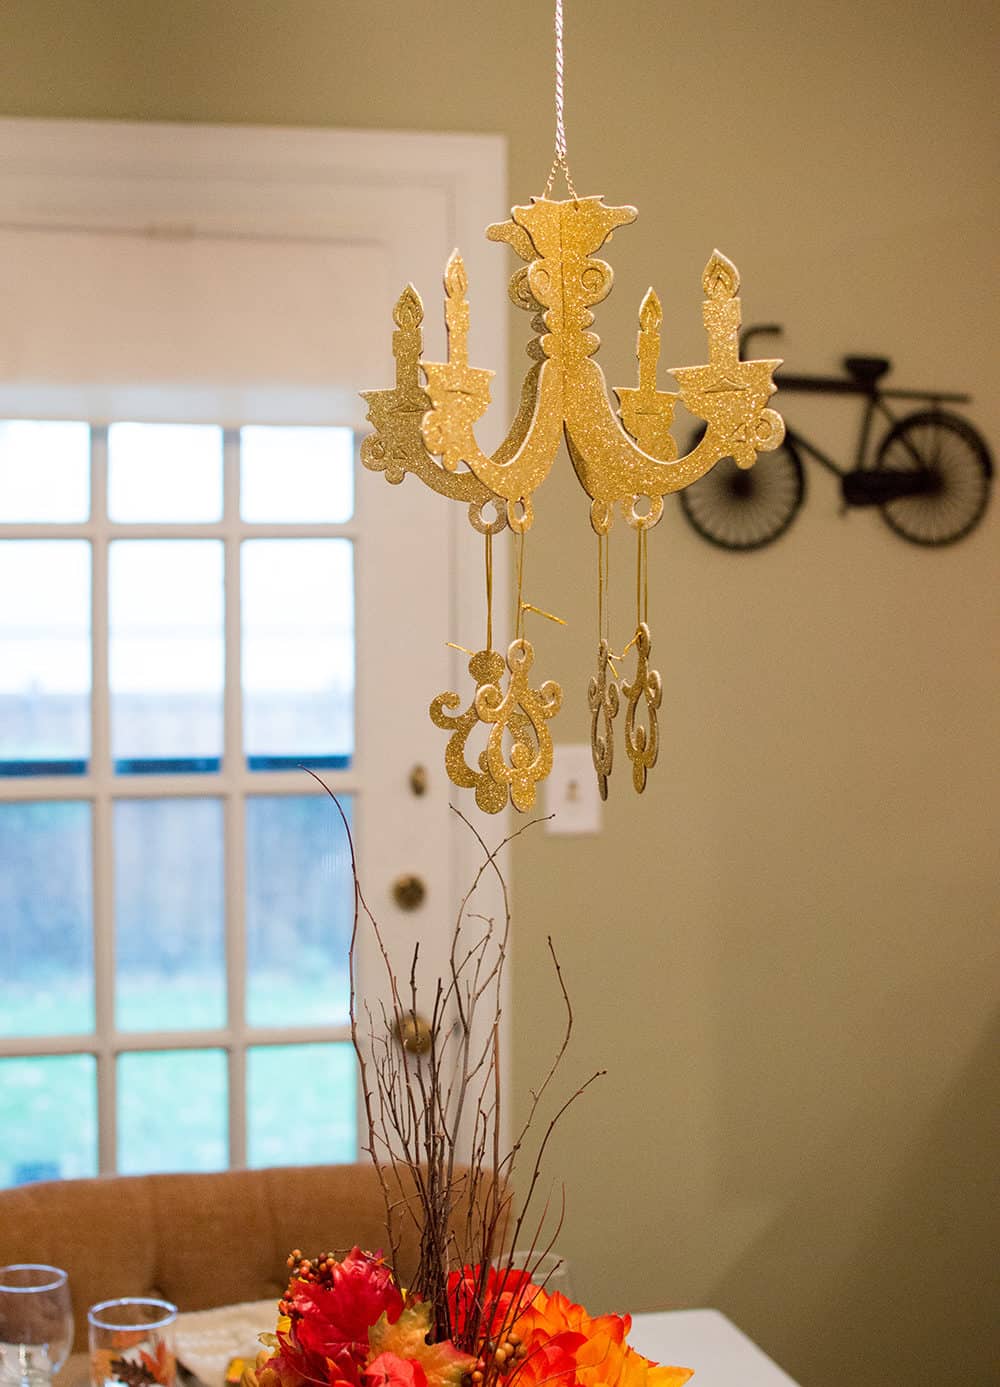 Gold Chandelier party prop from Oriental Trading